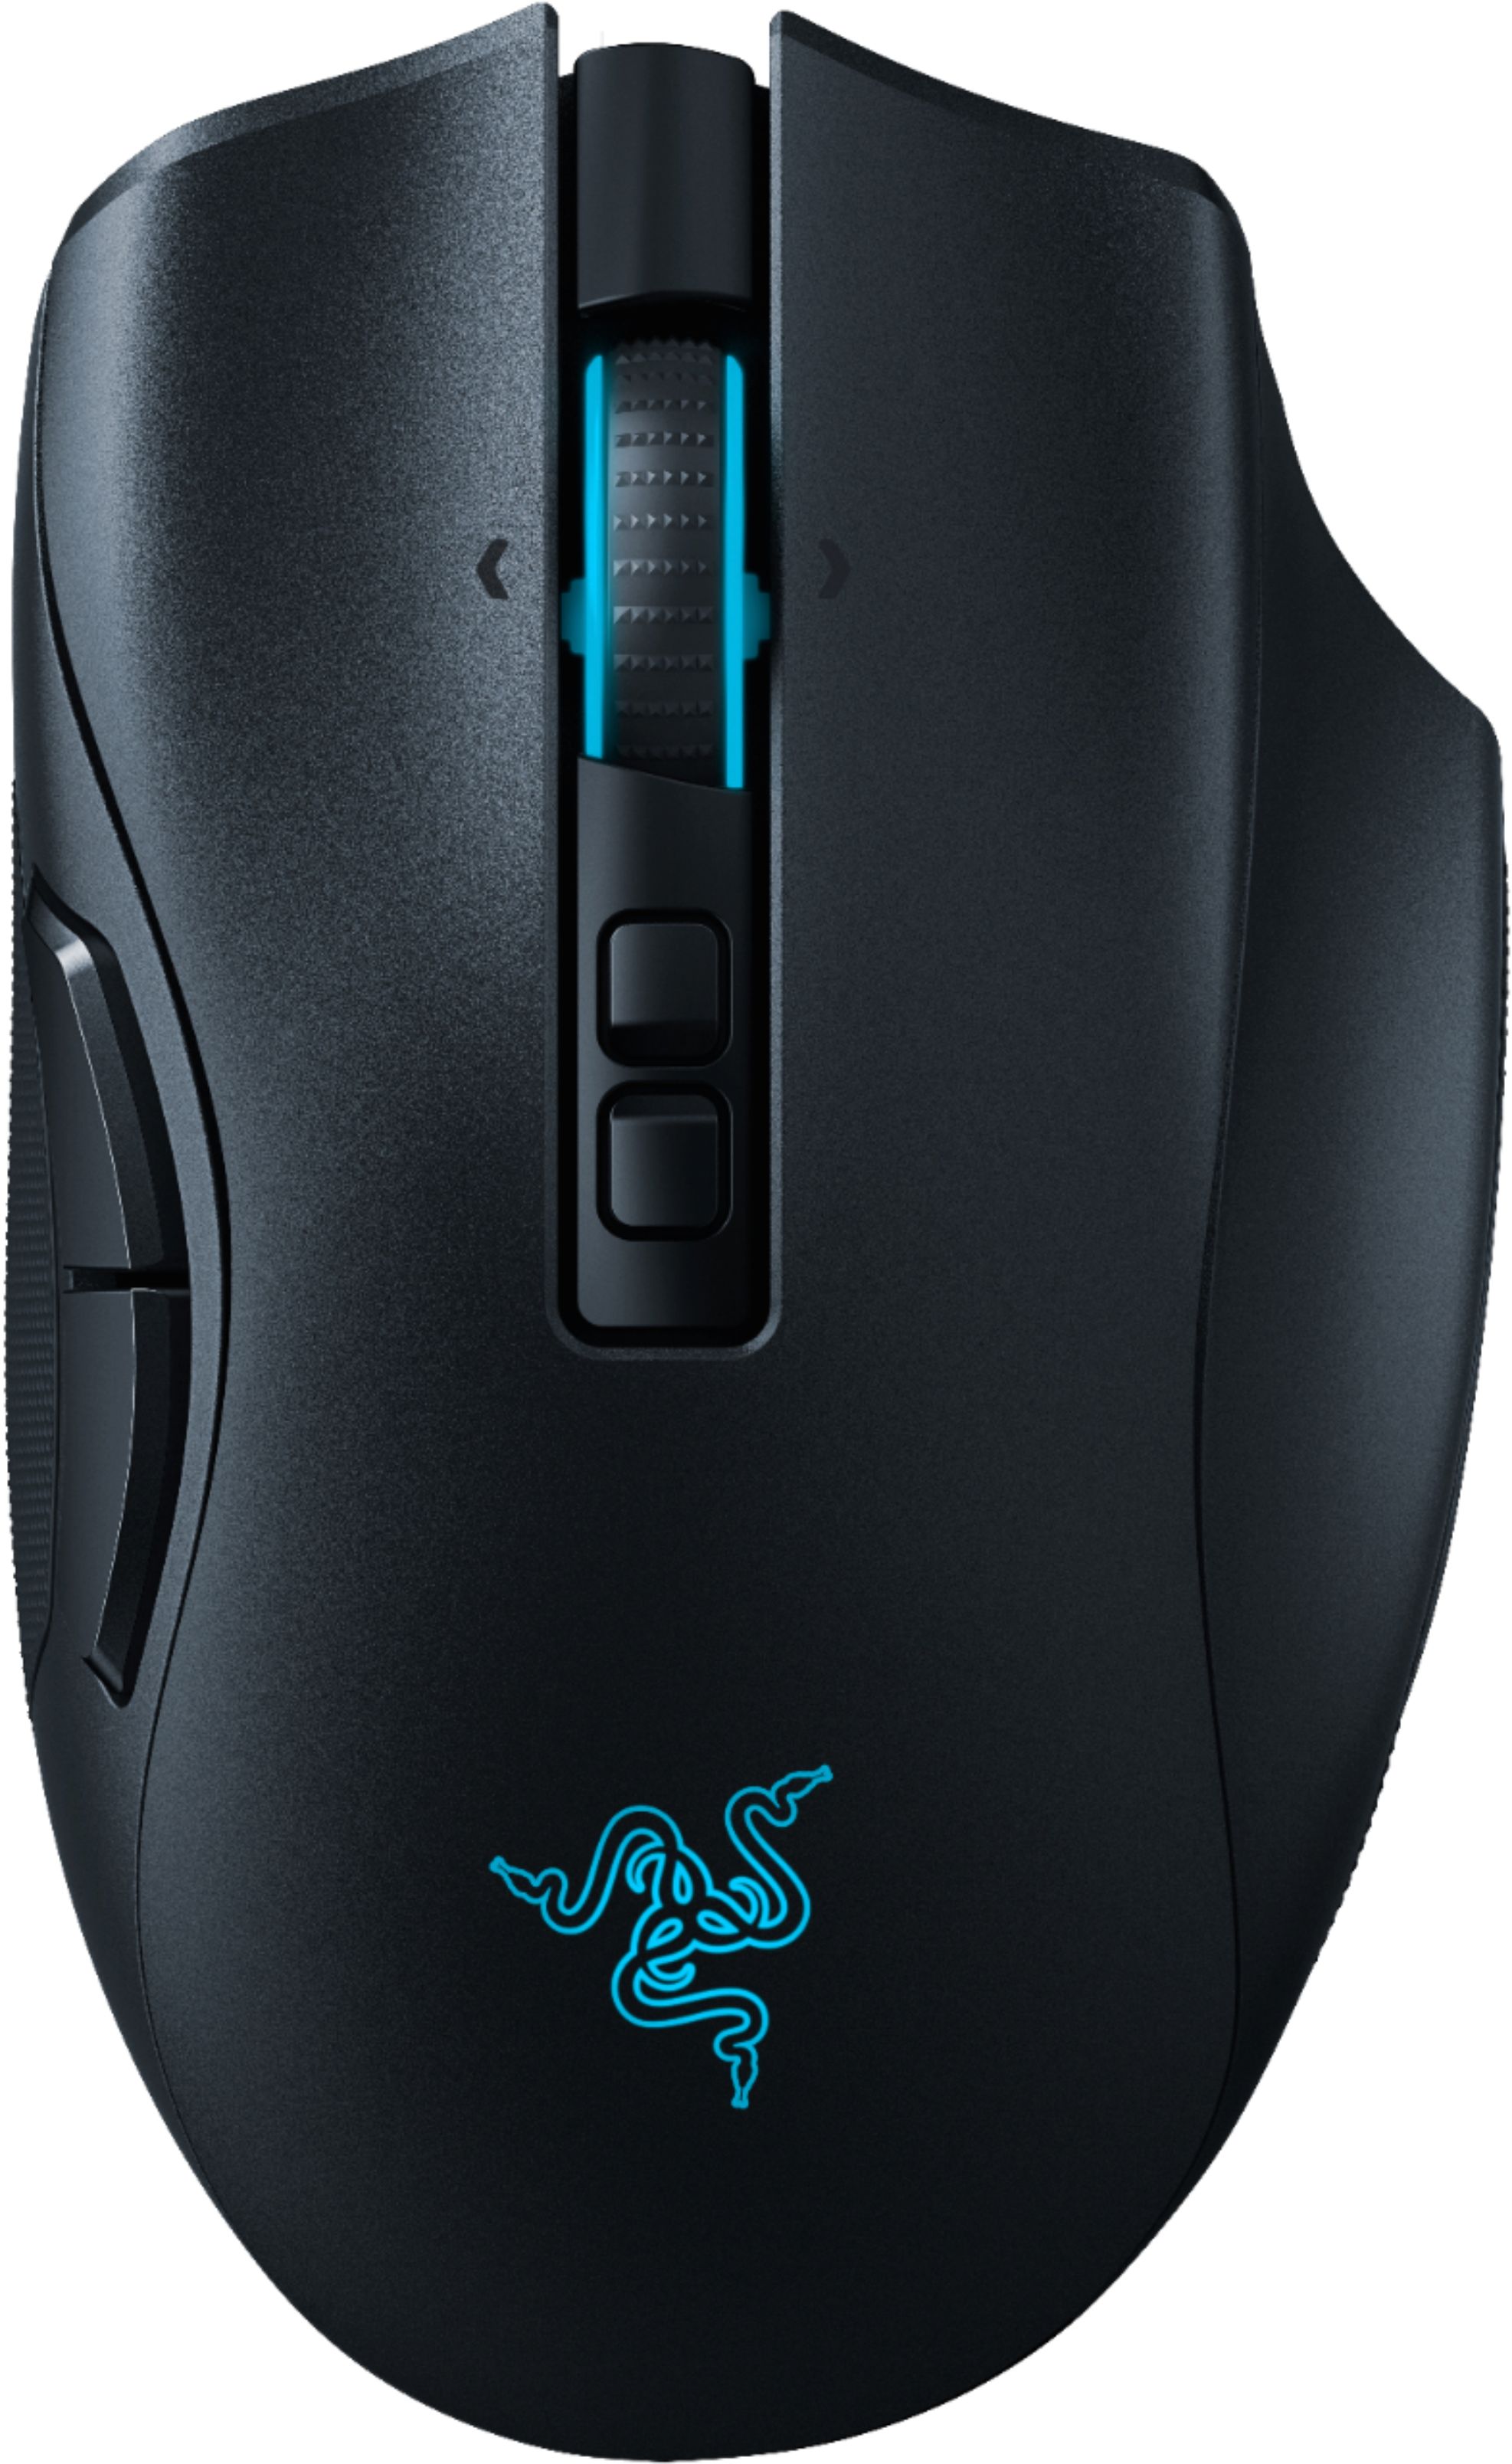 Razer Naga Pro Wireless Optical Mouse with Interchangeable Side Plates in 2, 6, 12 Button Configurations RZ01-03420100-R3U1 - Best